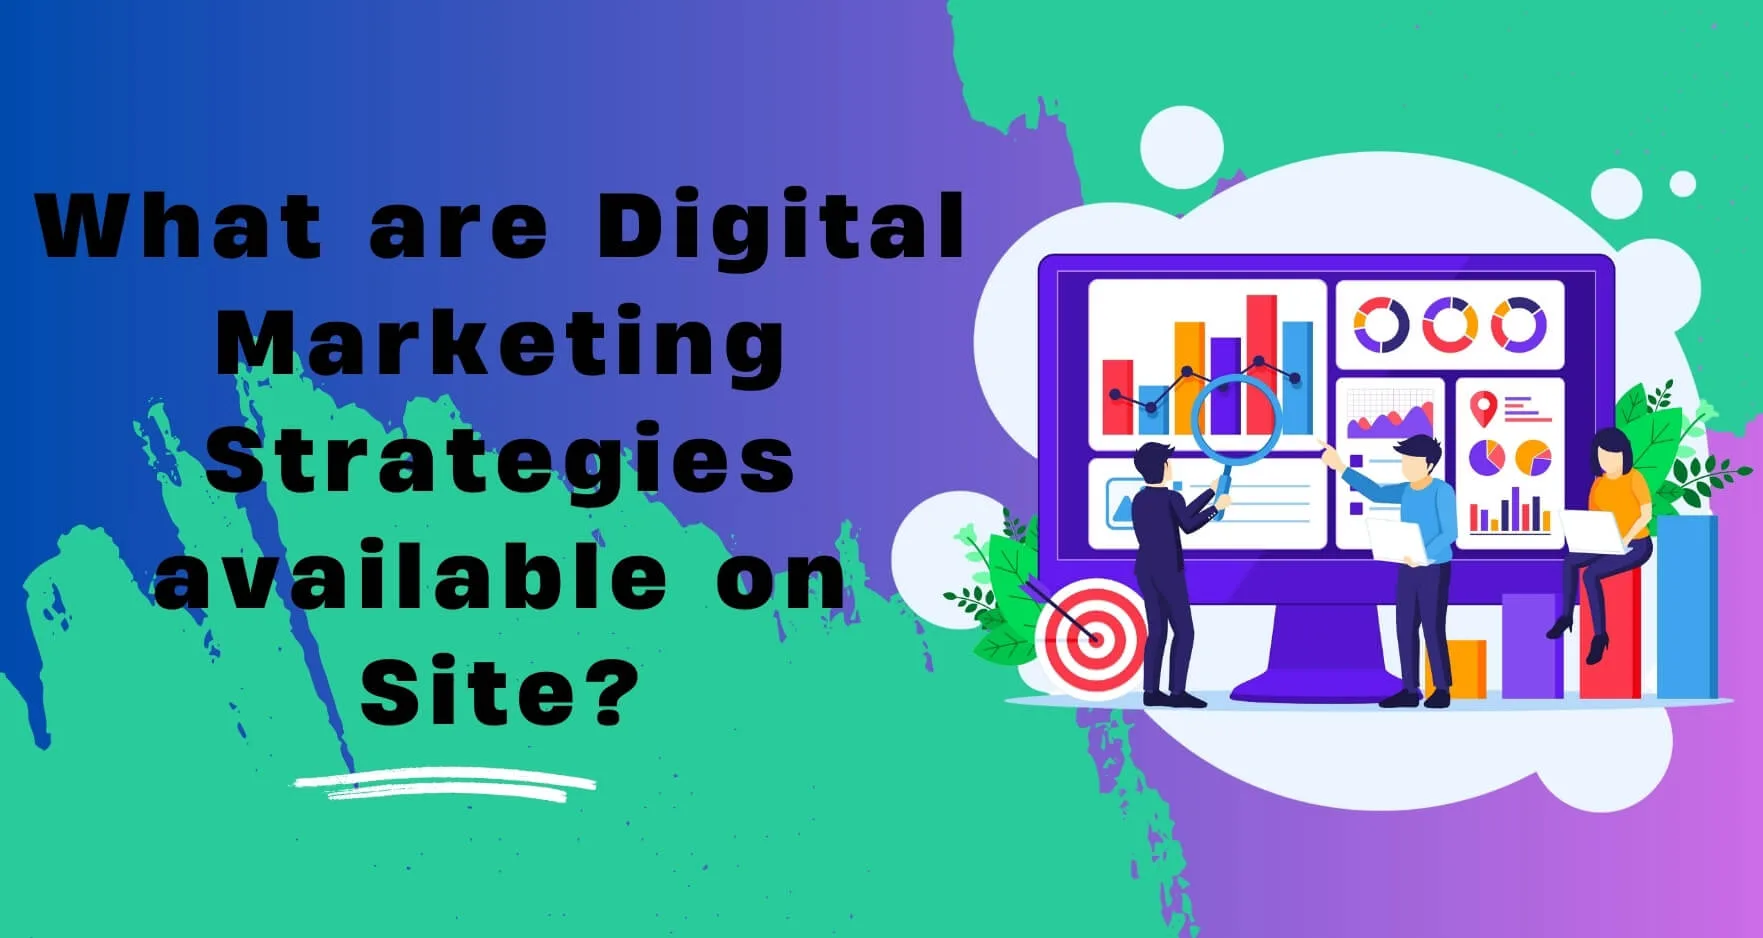 What are the Digital Marketing Strategies available on Site?